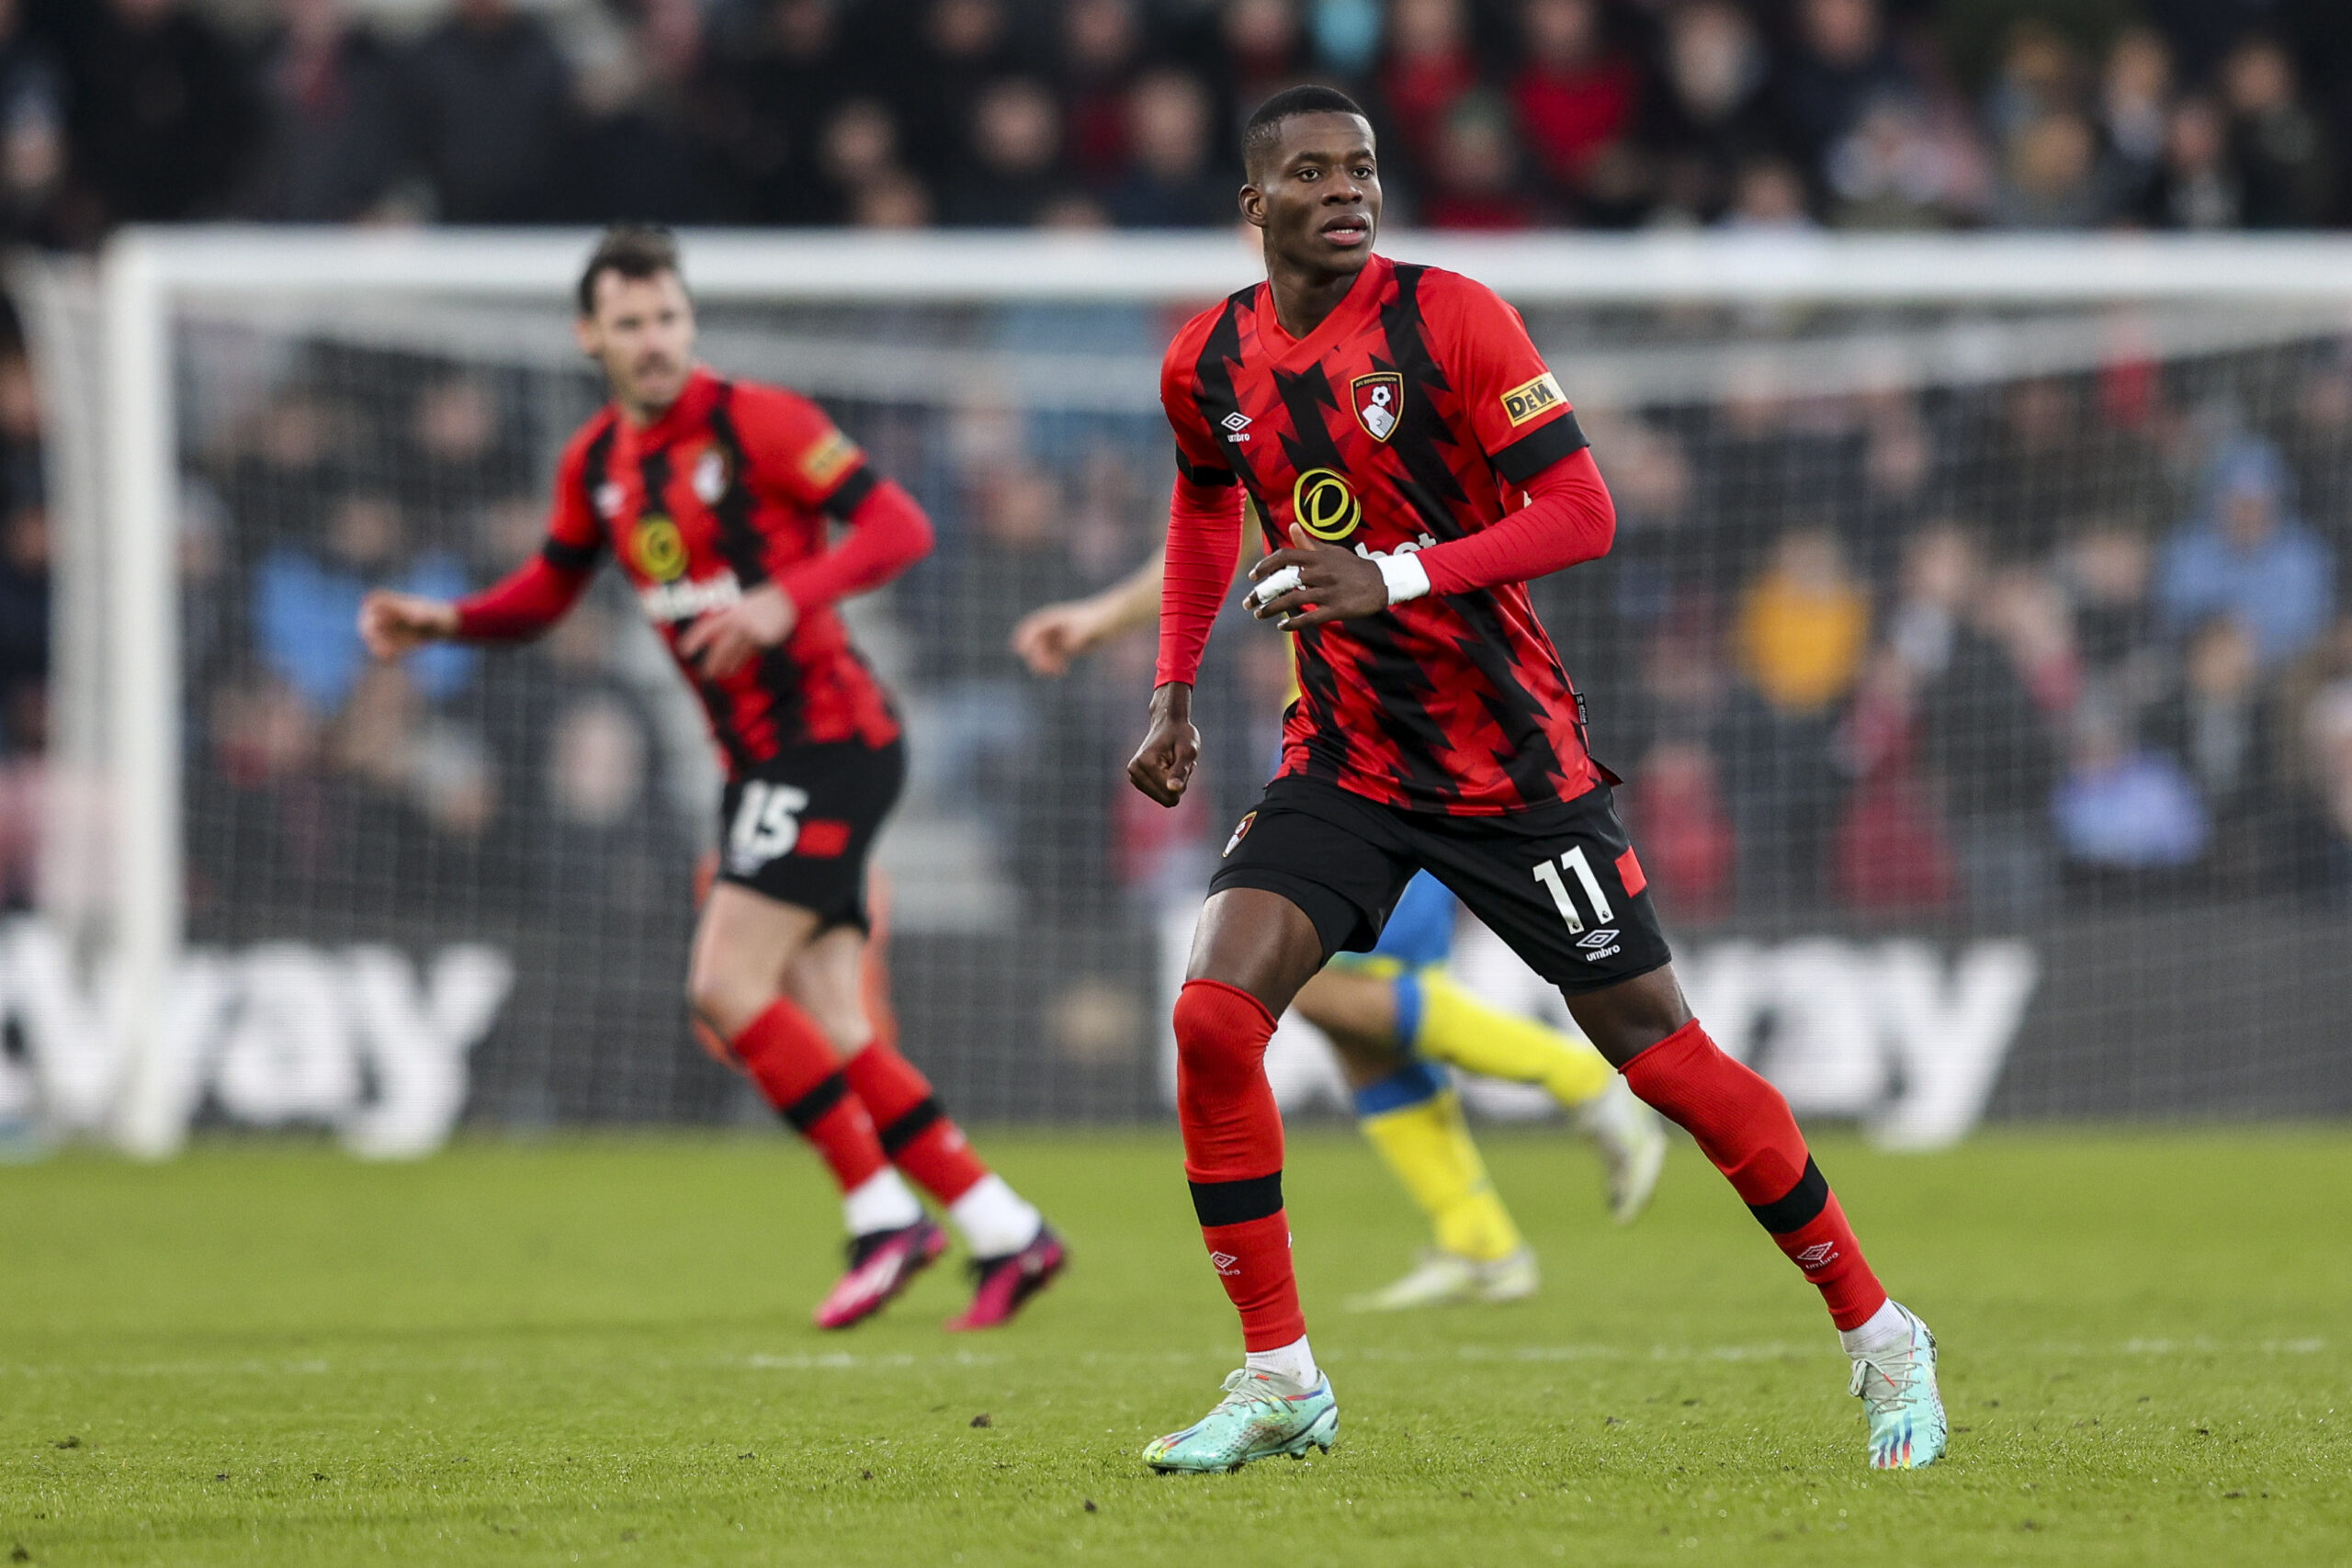 BOURNEMOUTH, ENGLAND - JANUARY 21: Dango Ouattara of Bournemouth during the Premier League match between AFC Bournemouth and Nottingham Forest at Vitality Stadium on January 21, 2023 in Bournemouth, England. (Photo by Robin Jones - AFC Bournemouth/AFC Bournemouth via Getty Images)